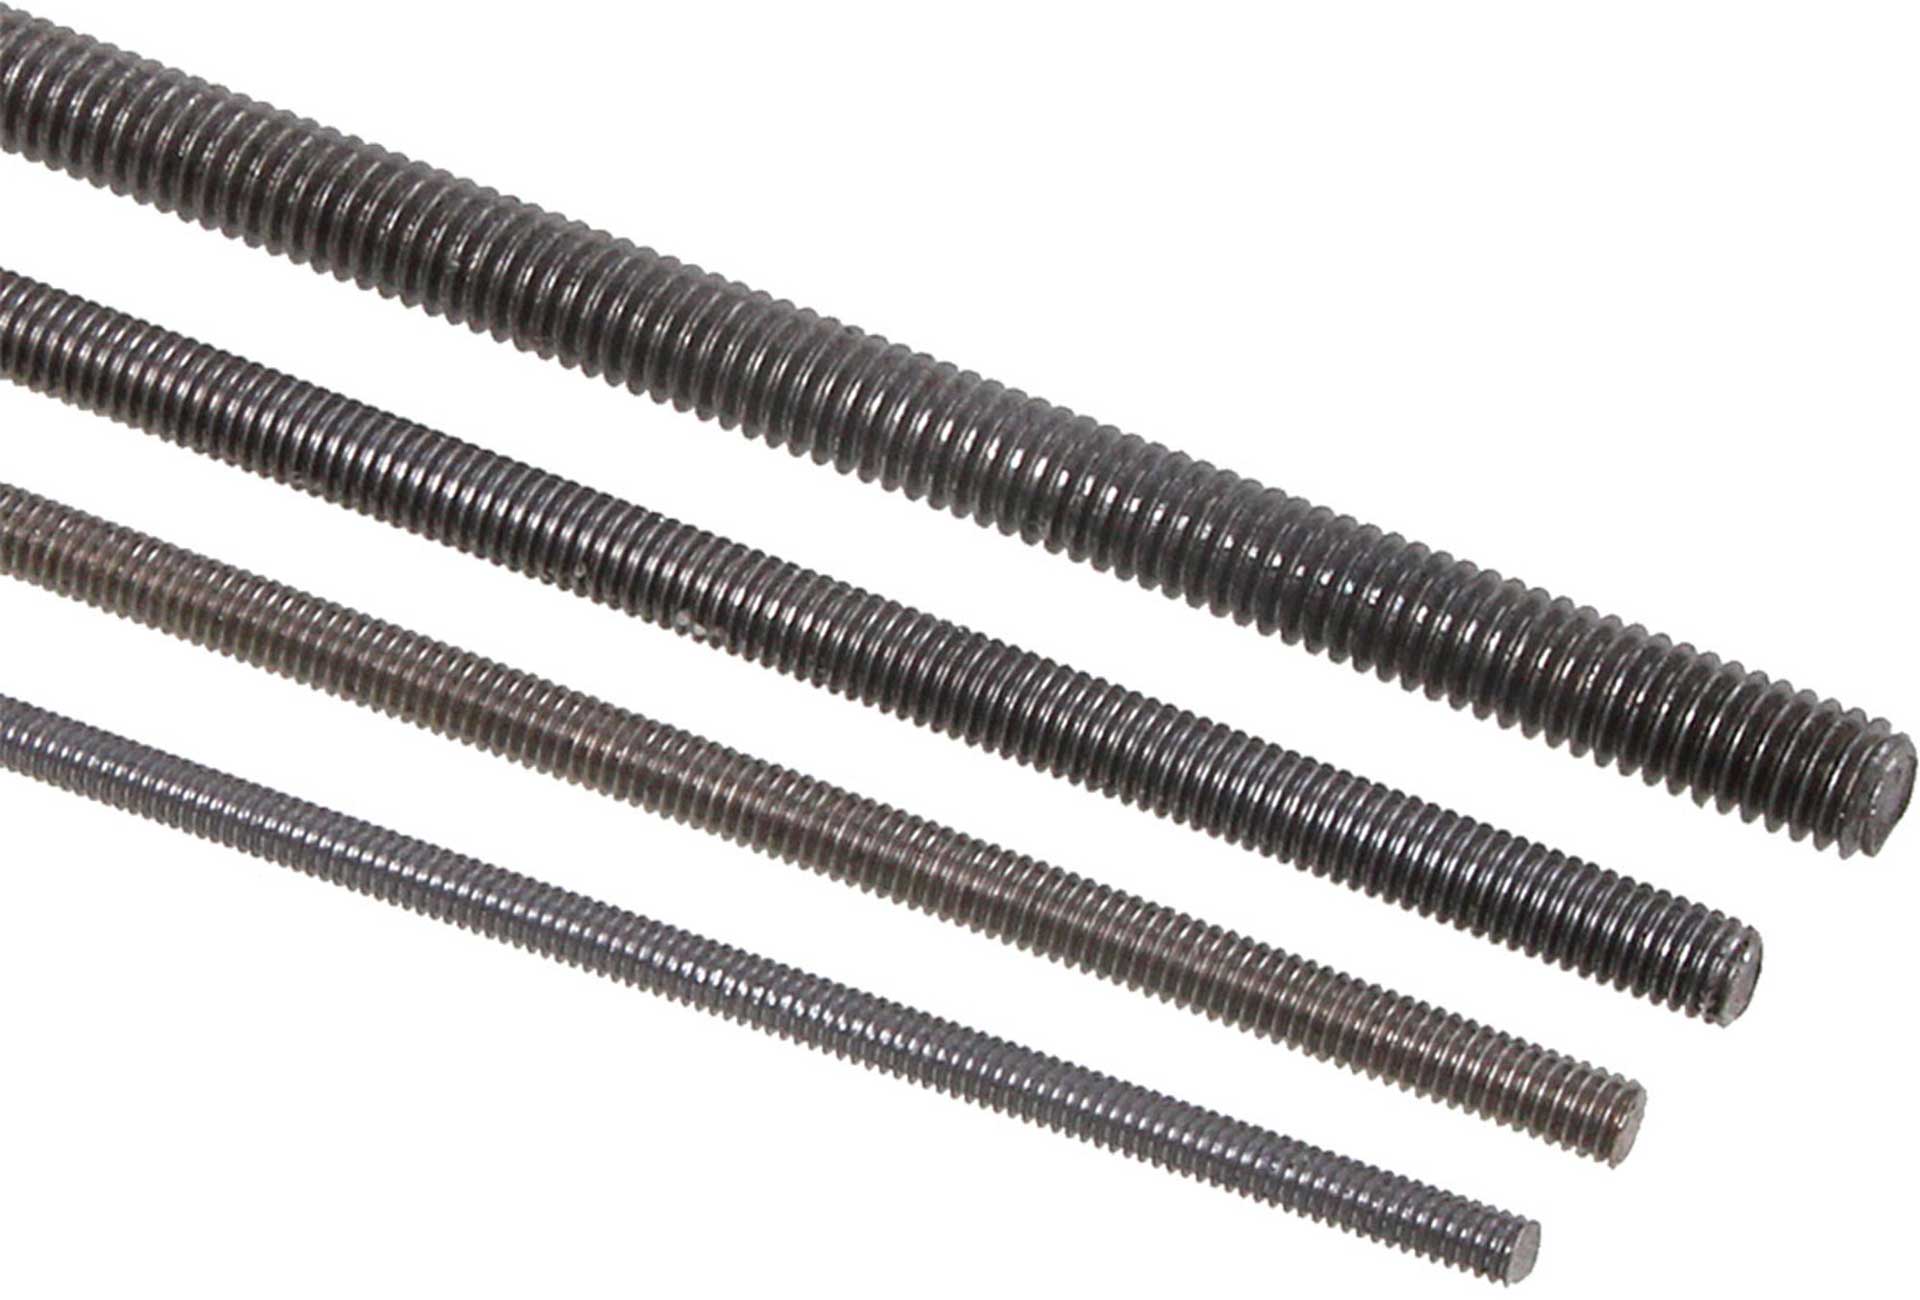 FAMOTEC THREADED ROD M4 THROUGH 500MM LONG WITH FULL THREAD OF STEEL, BRIGHT